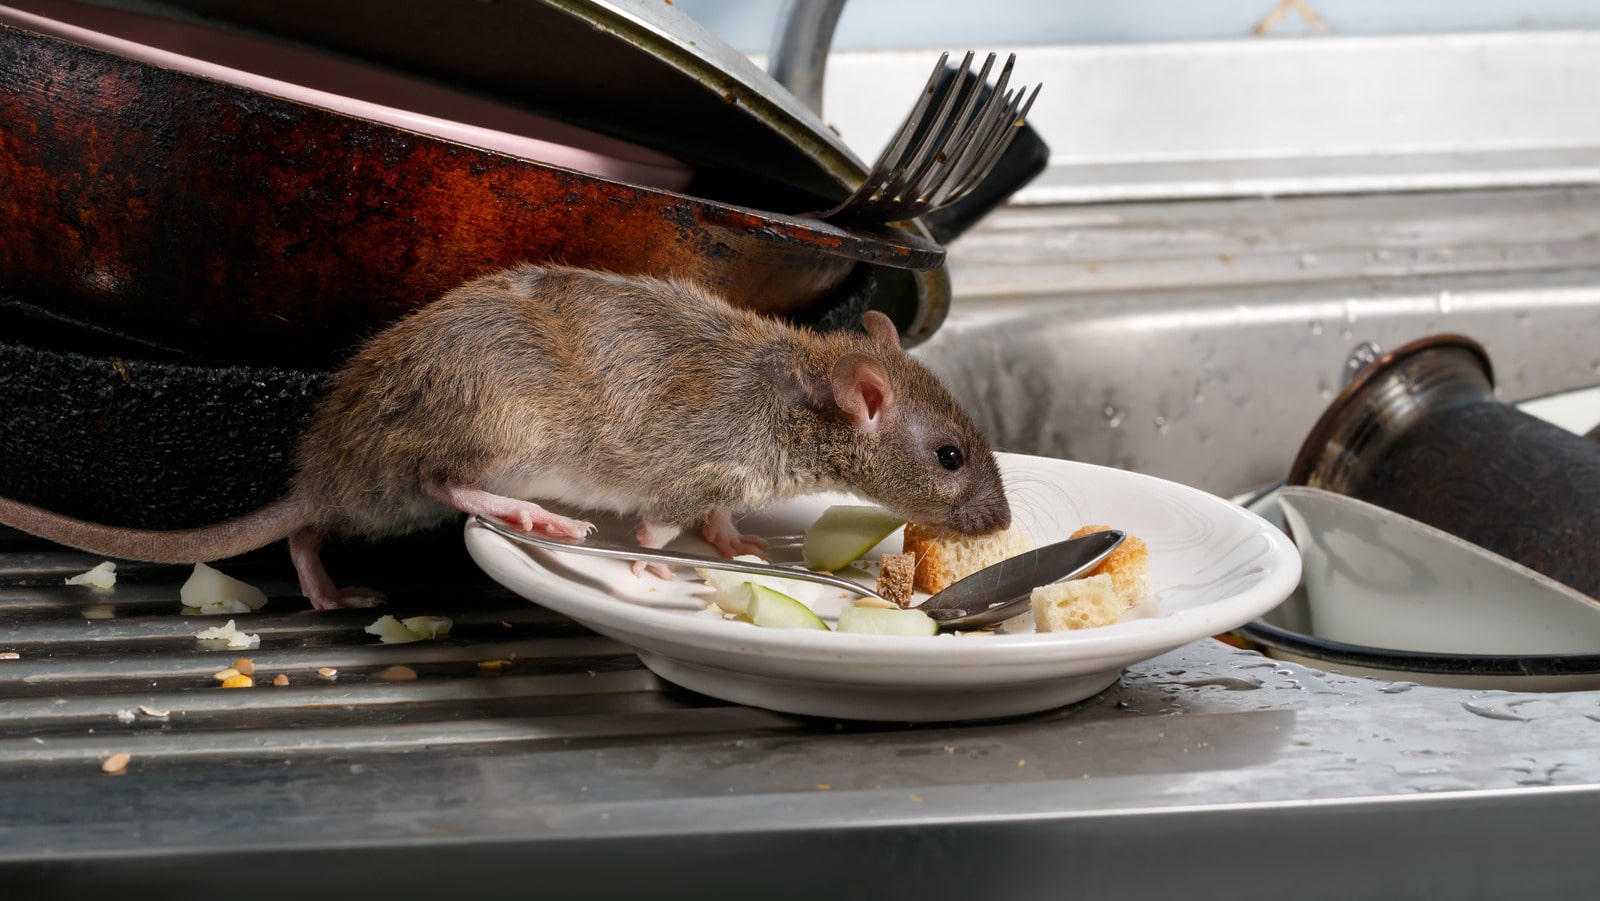 Squeaky Clean: Hygiene Habits To Deter Rats From Your Living Space